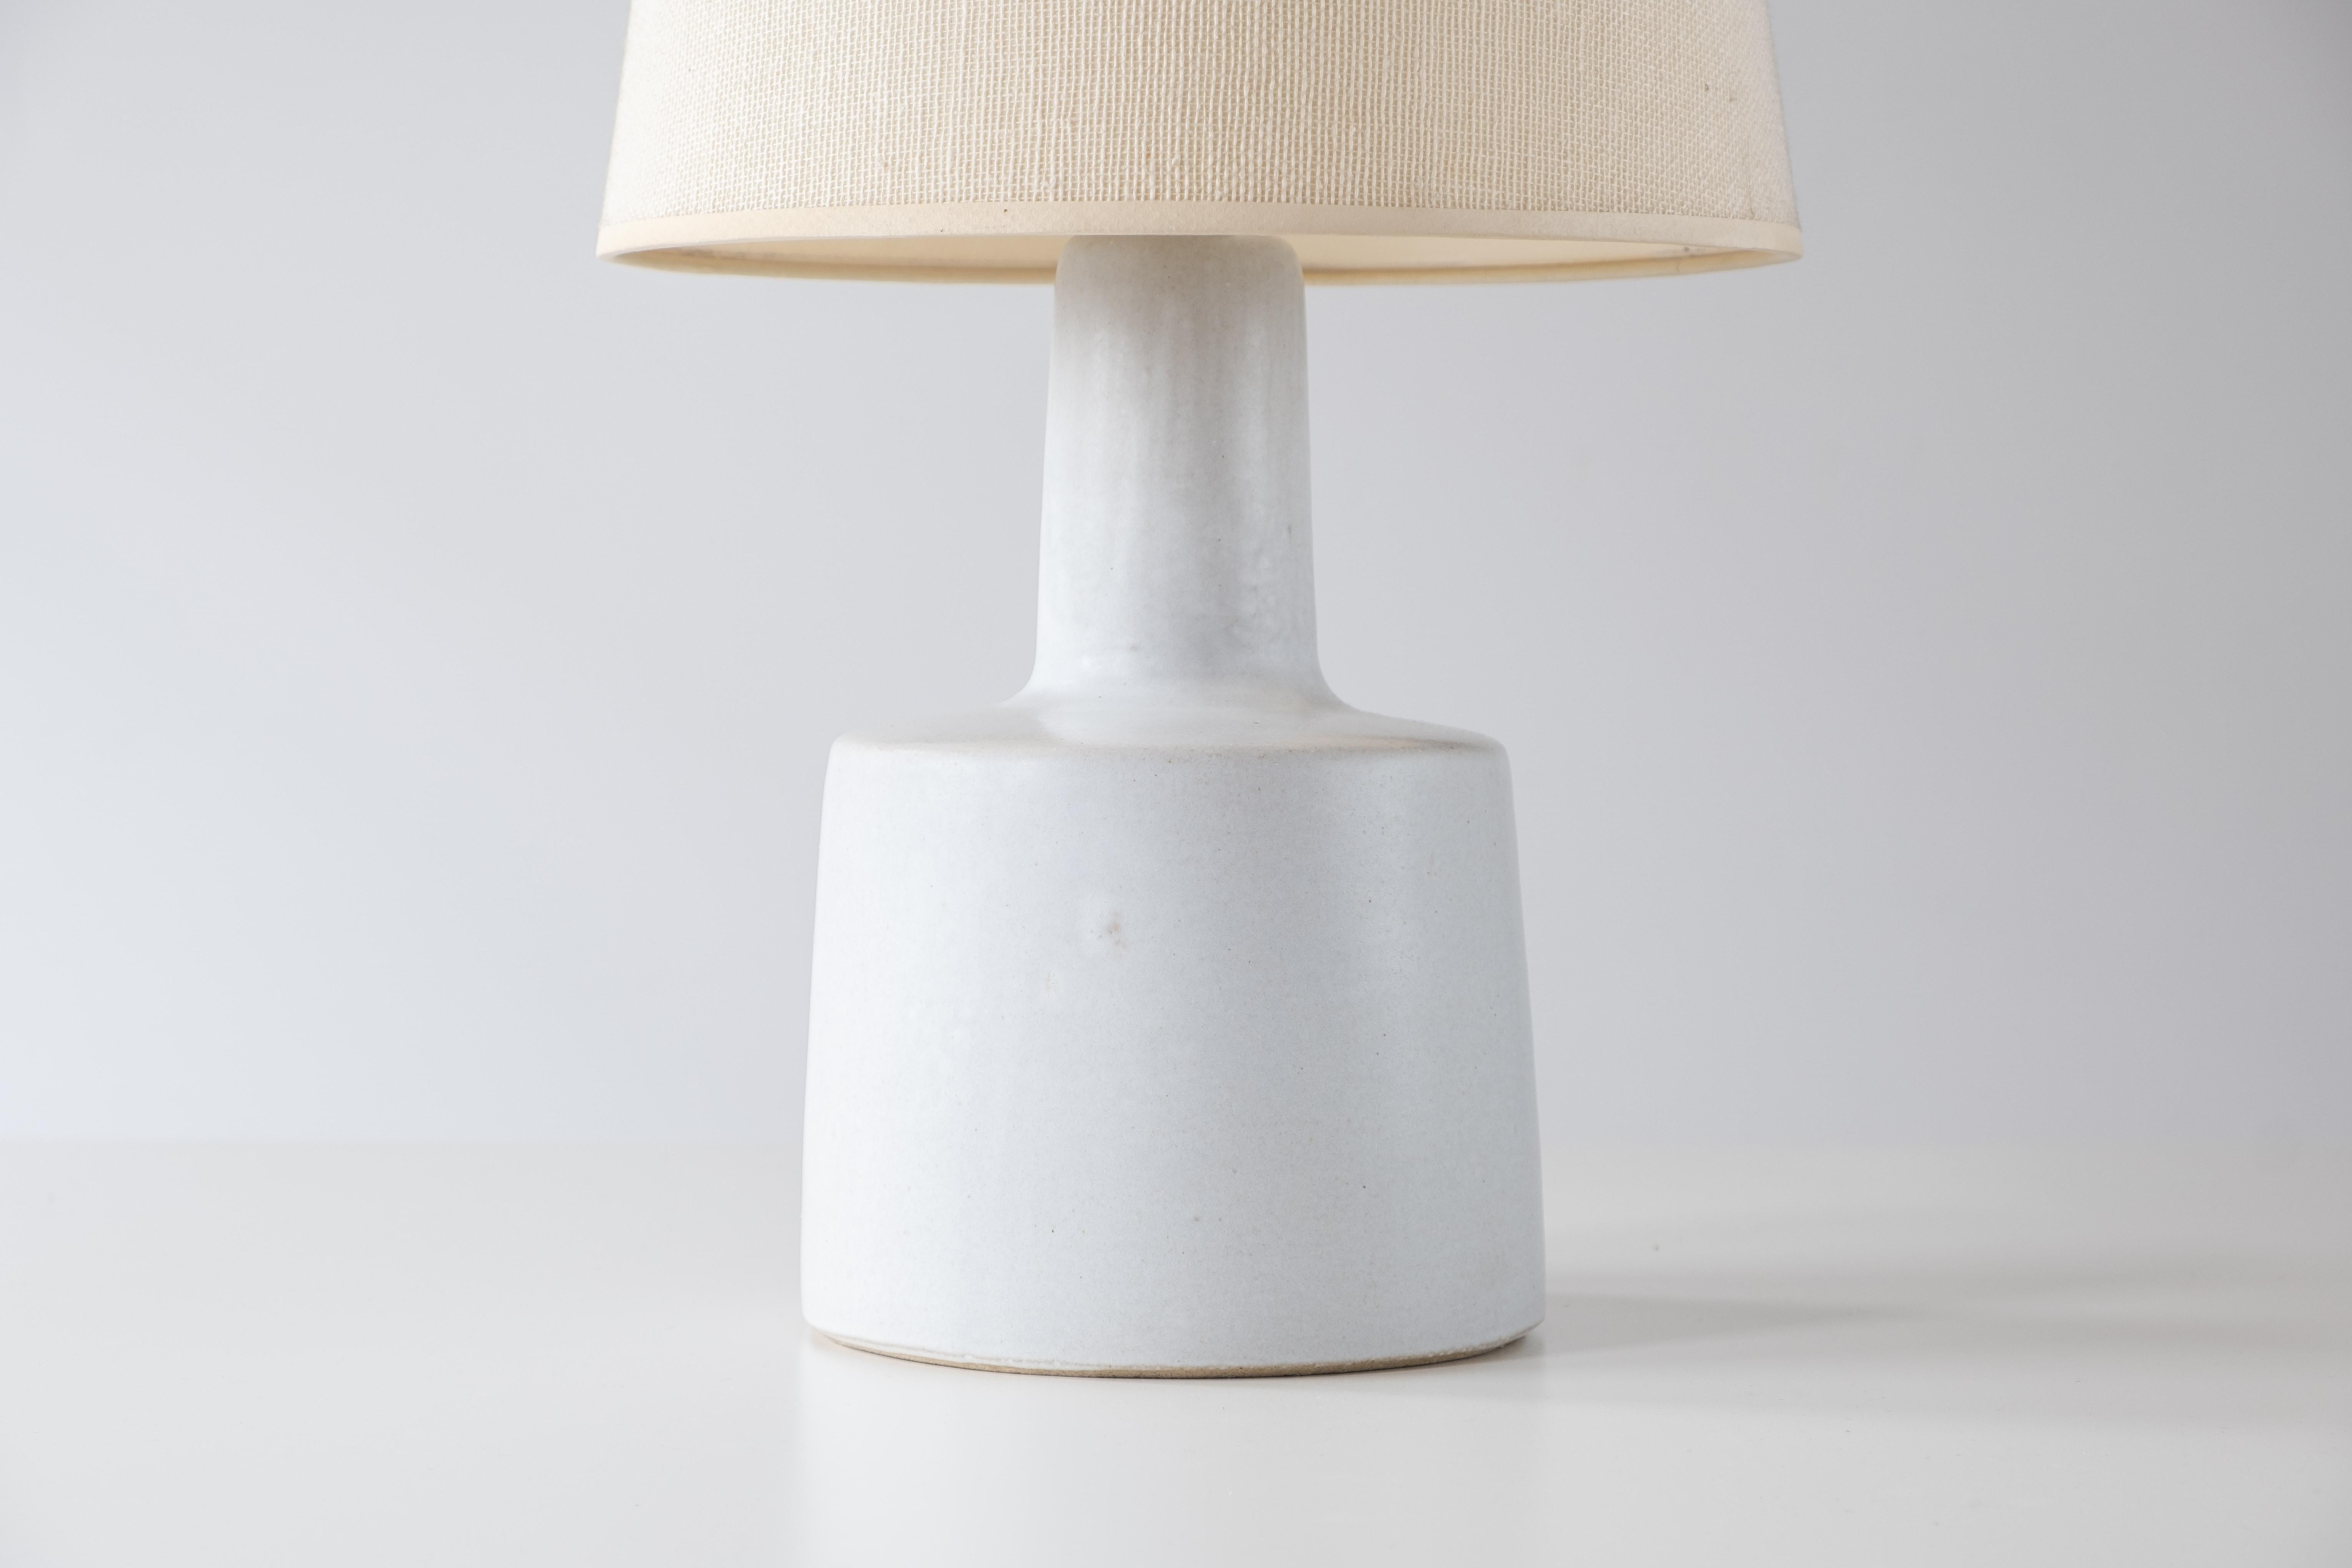 Martz / Marshall Studios Ceramic Pottery Table Lamp — Satin Speckled White Glaze In Good Condition For Sale In Portland, OR